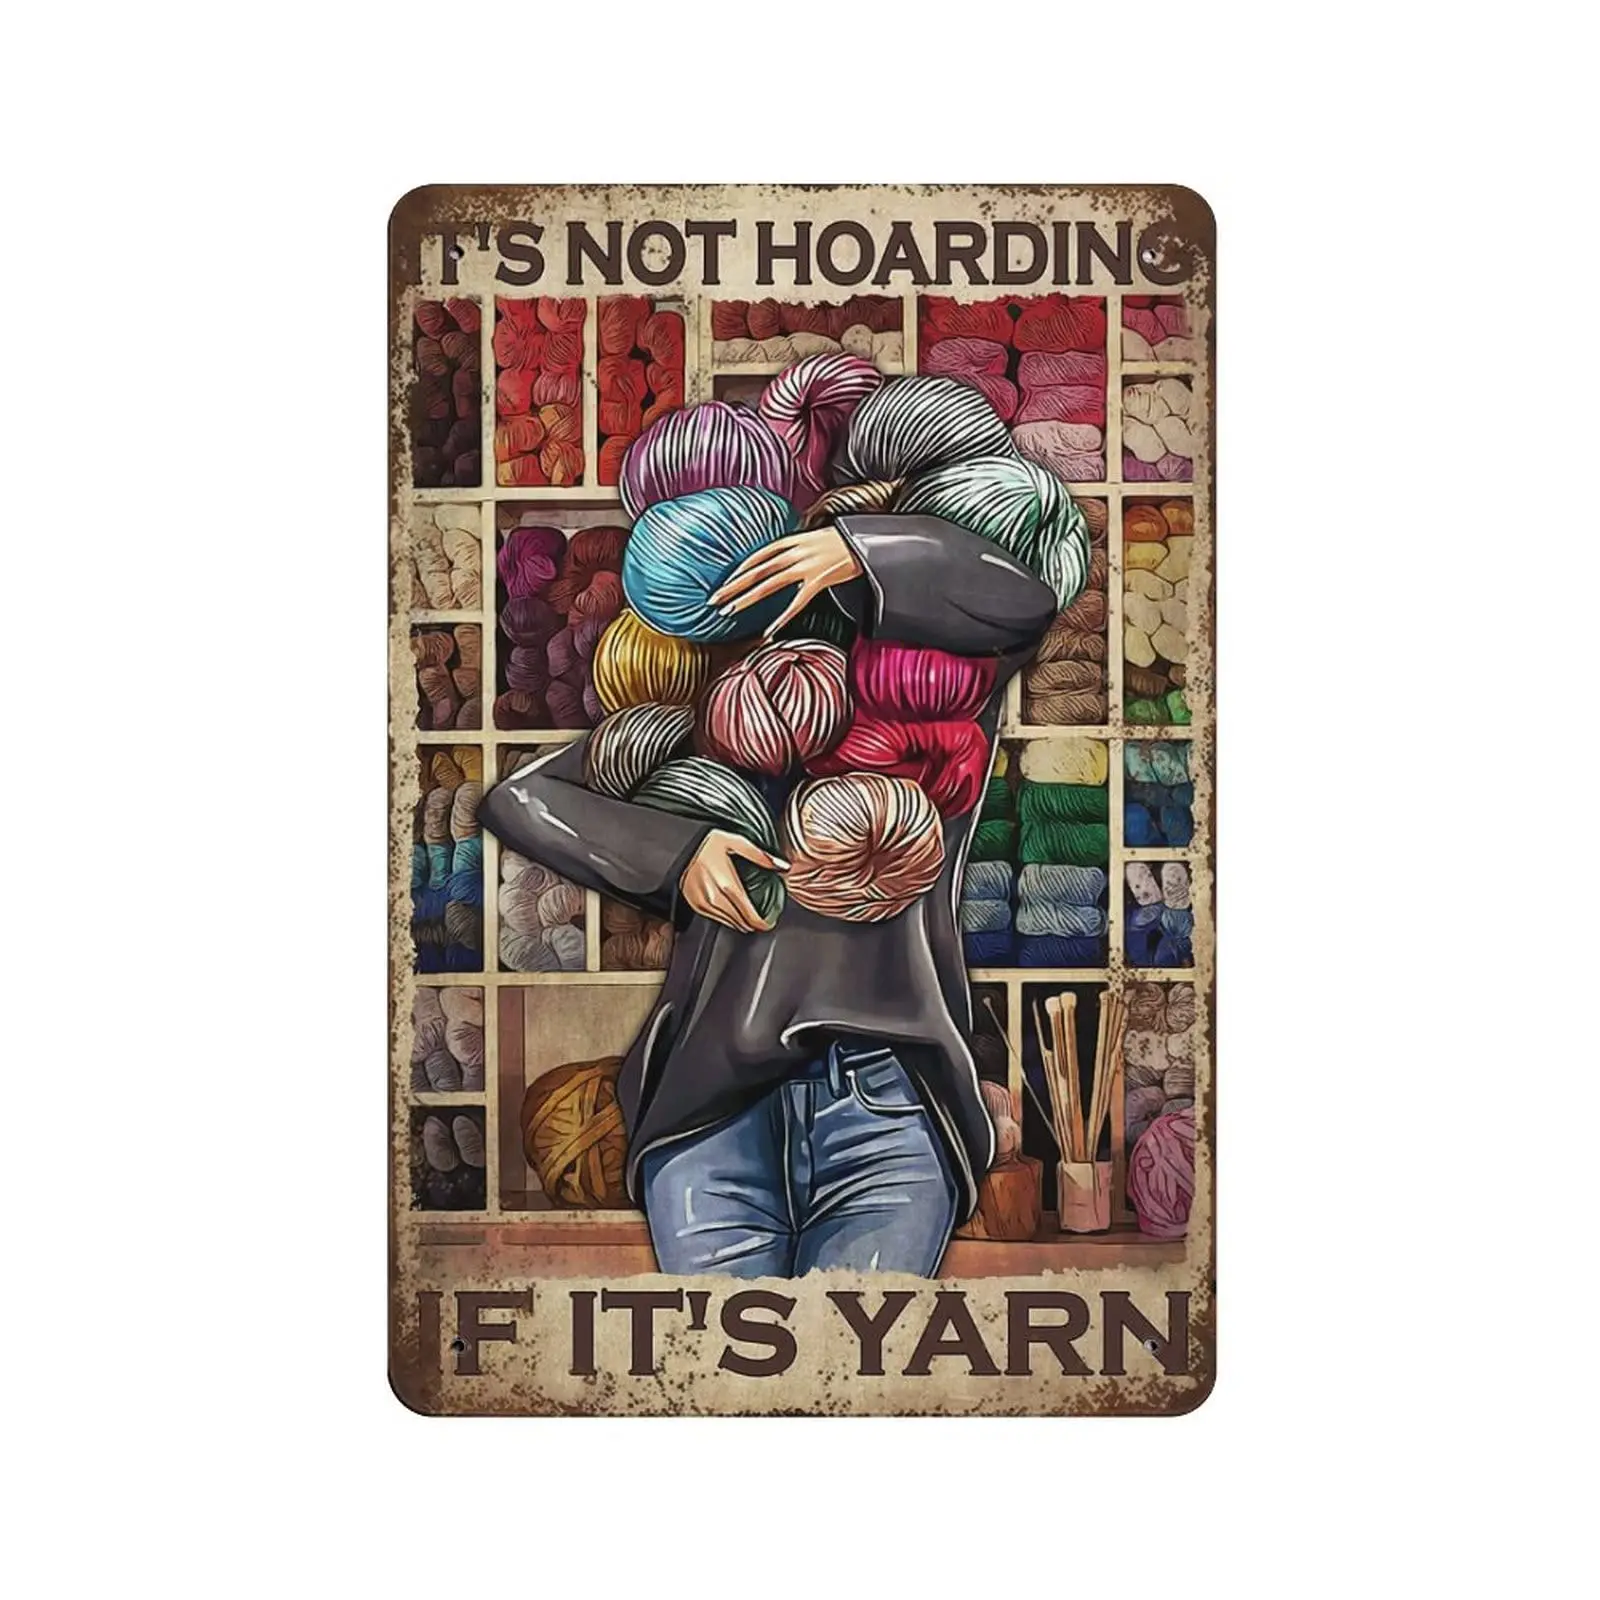 

Retro Metal Tin Sign Plaque-It's Not Hoarding If It's Yarn Vintage Art Vertical Tin Sign -Novelty Posters，Bar Pub Club